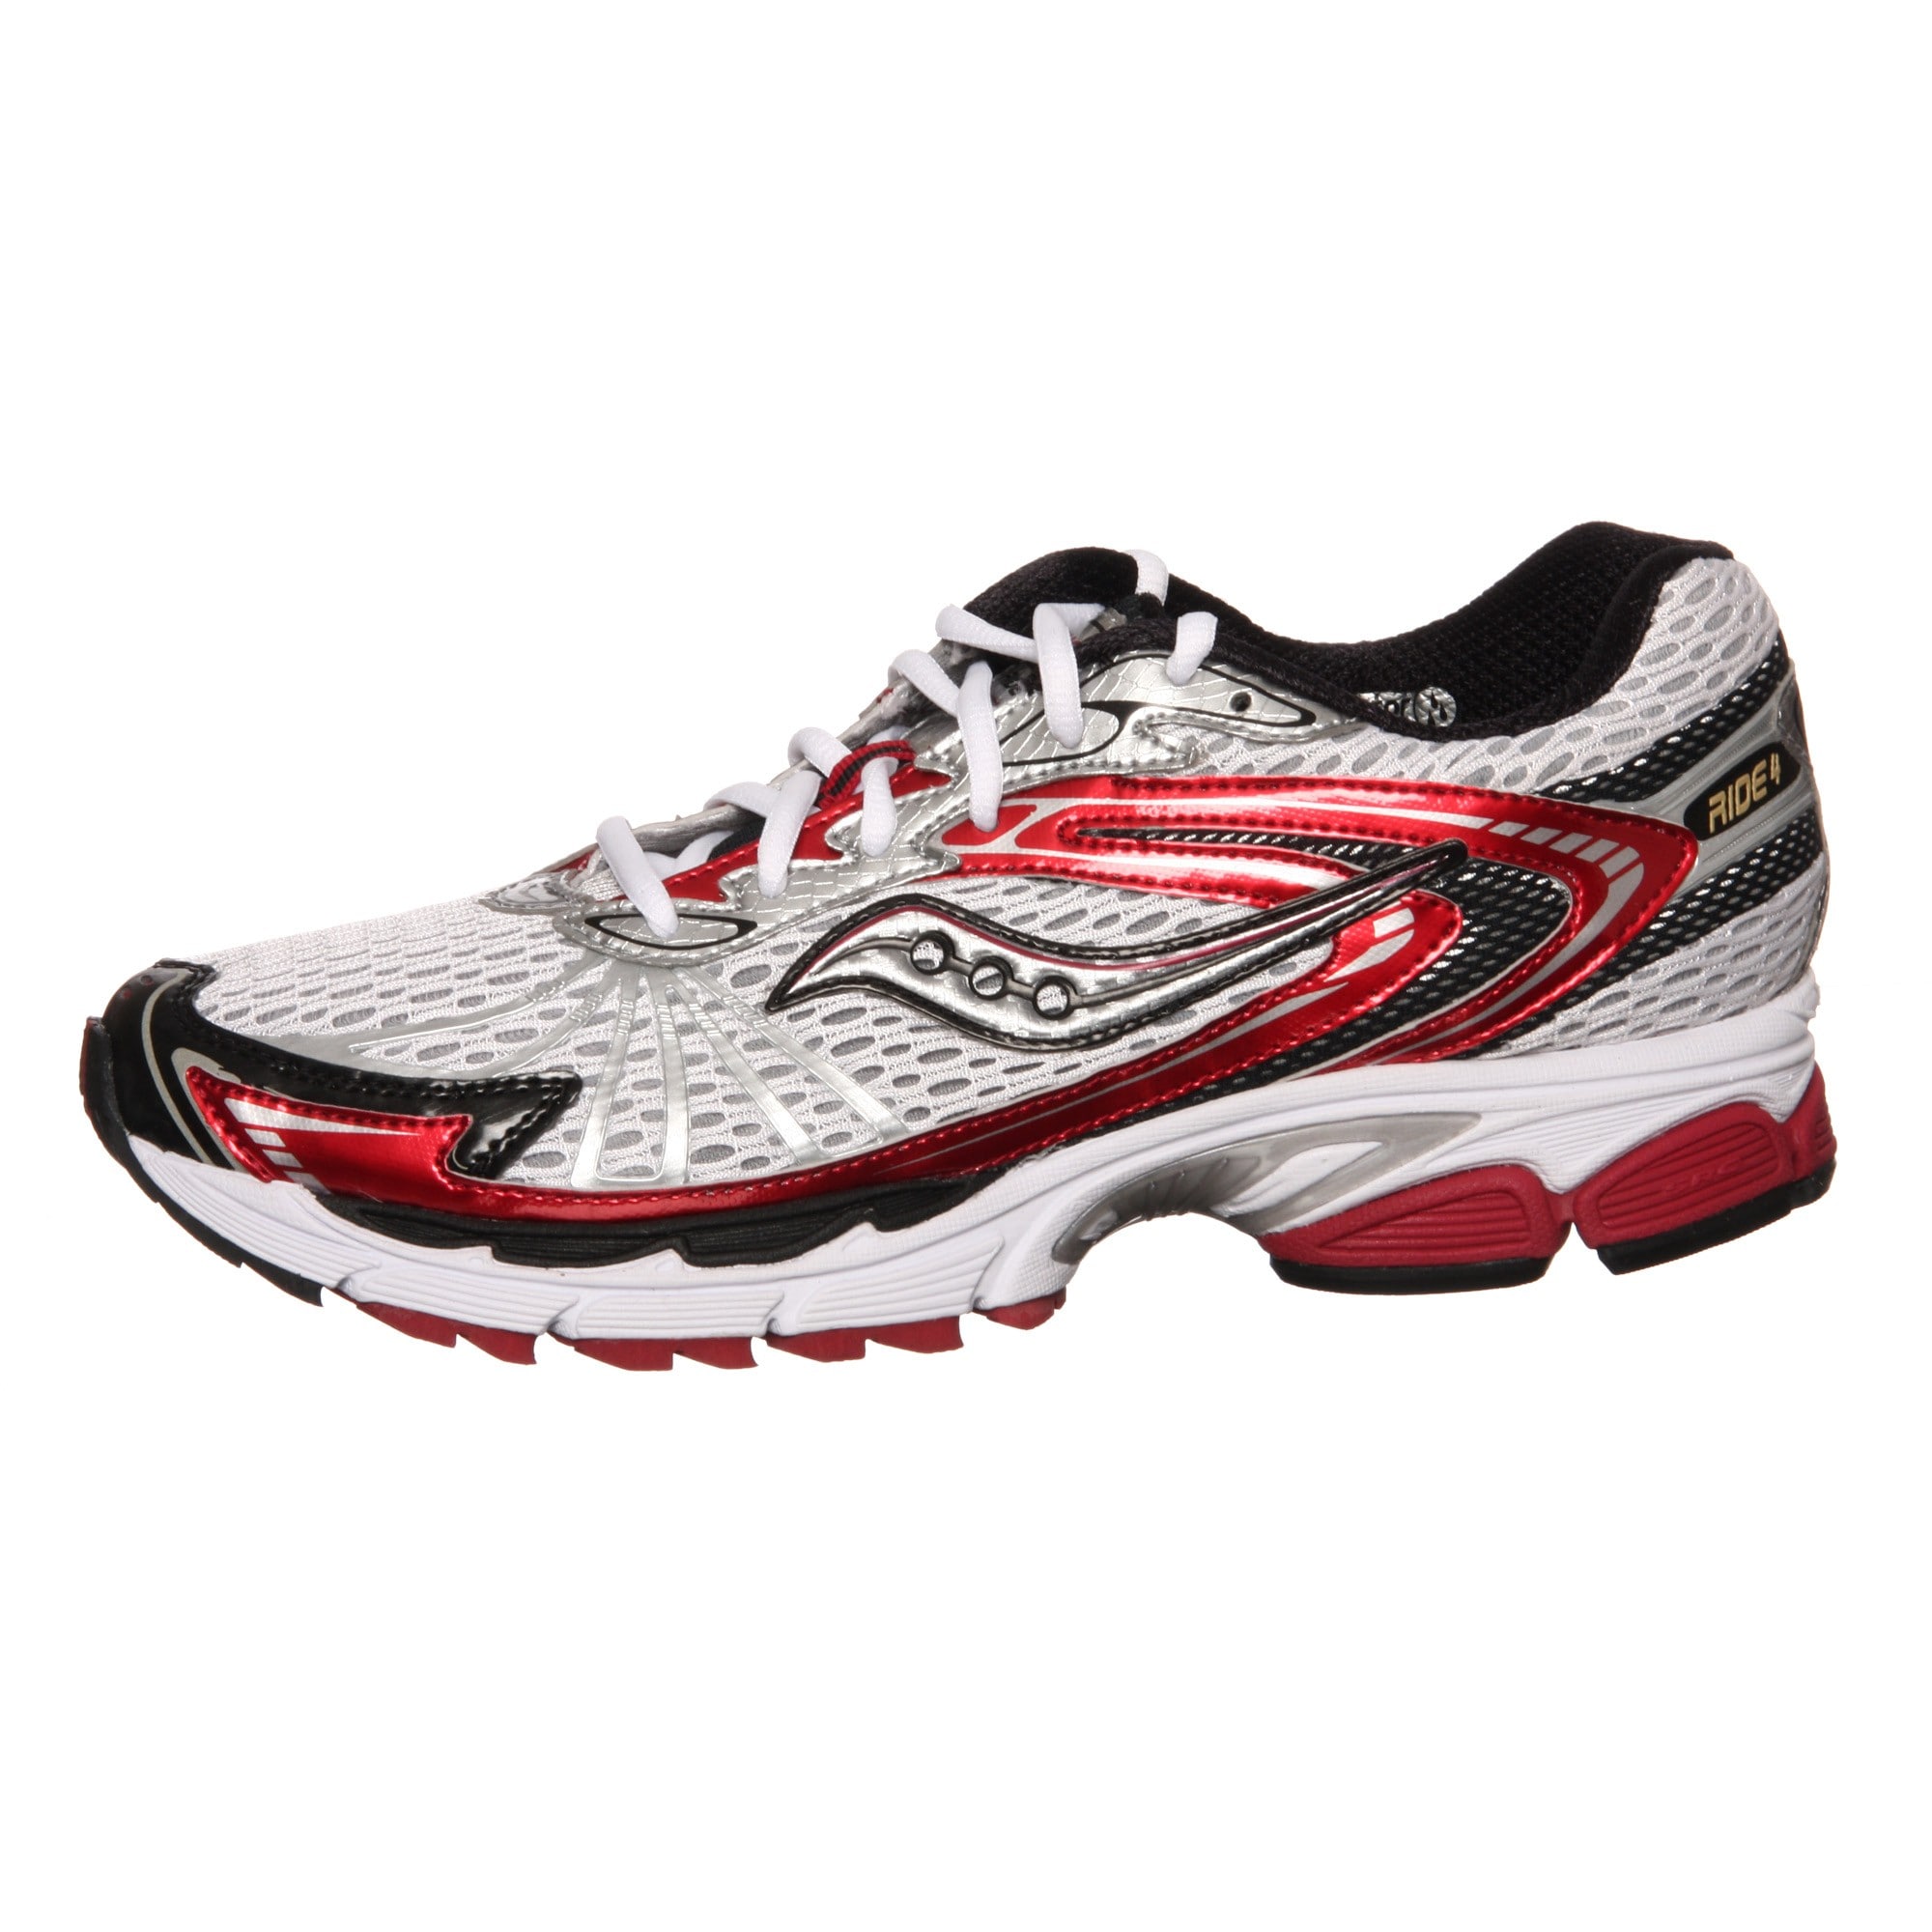 ProGrid Ride 4' Technical Running Shoes 